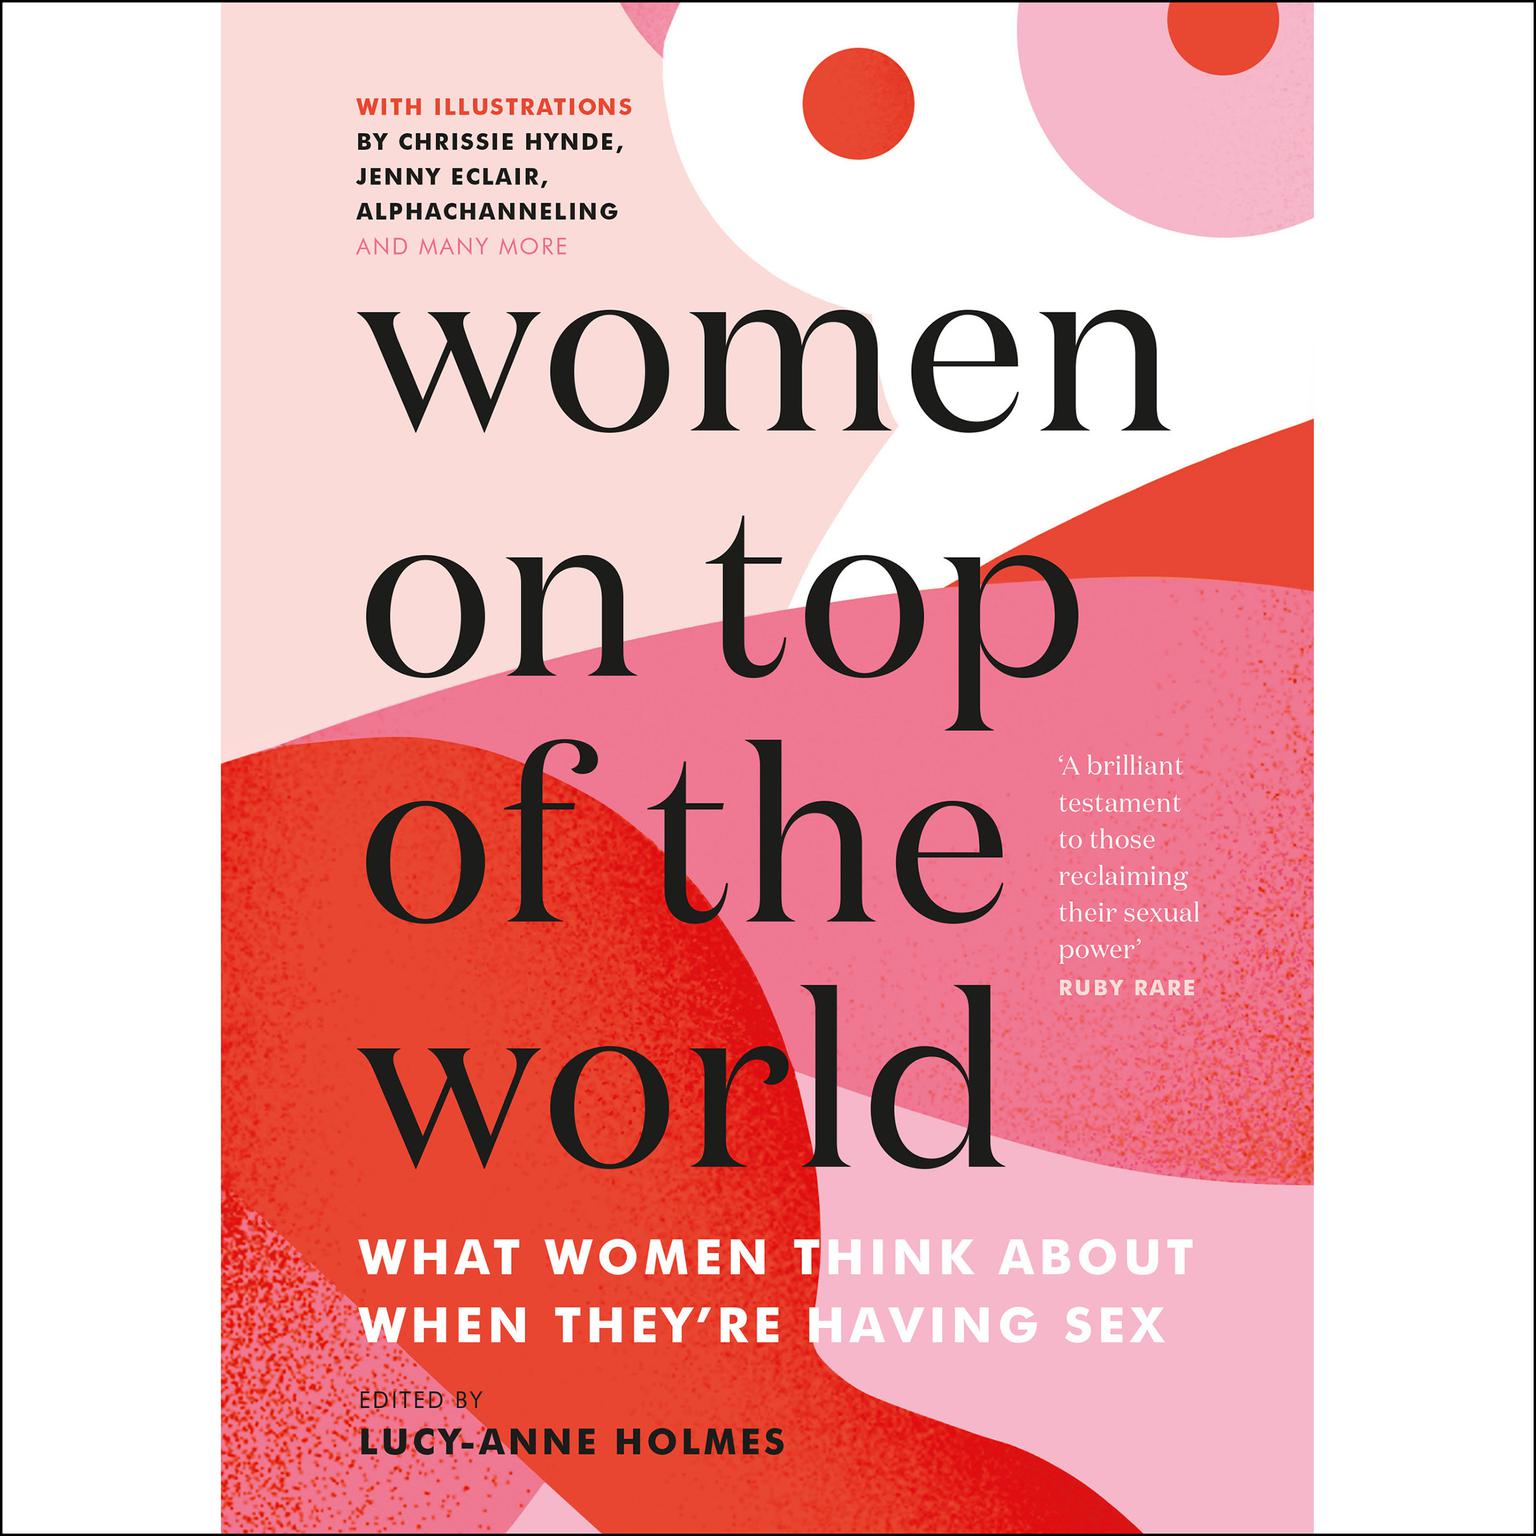 Women On Top of the World: What Women Think About When Theyre Having Sex Audiobook, by Lucy-Anne Holmes